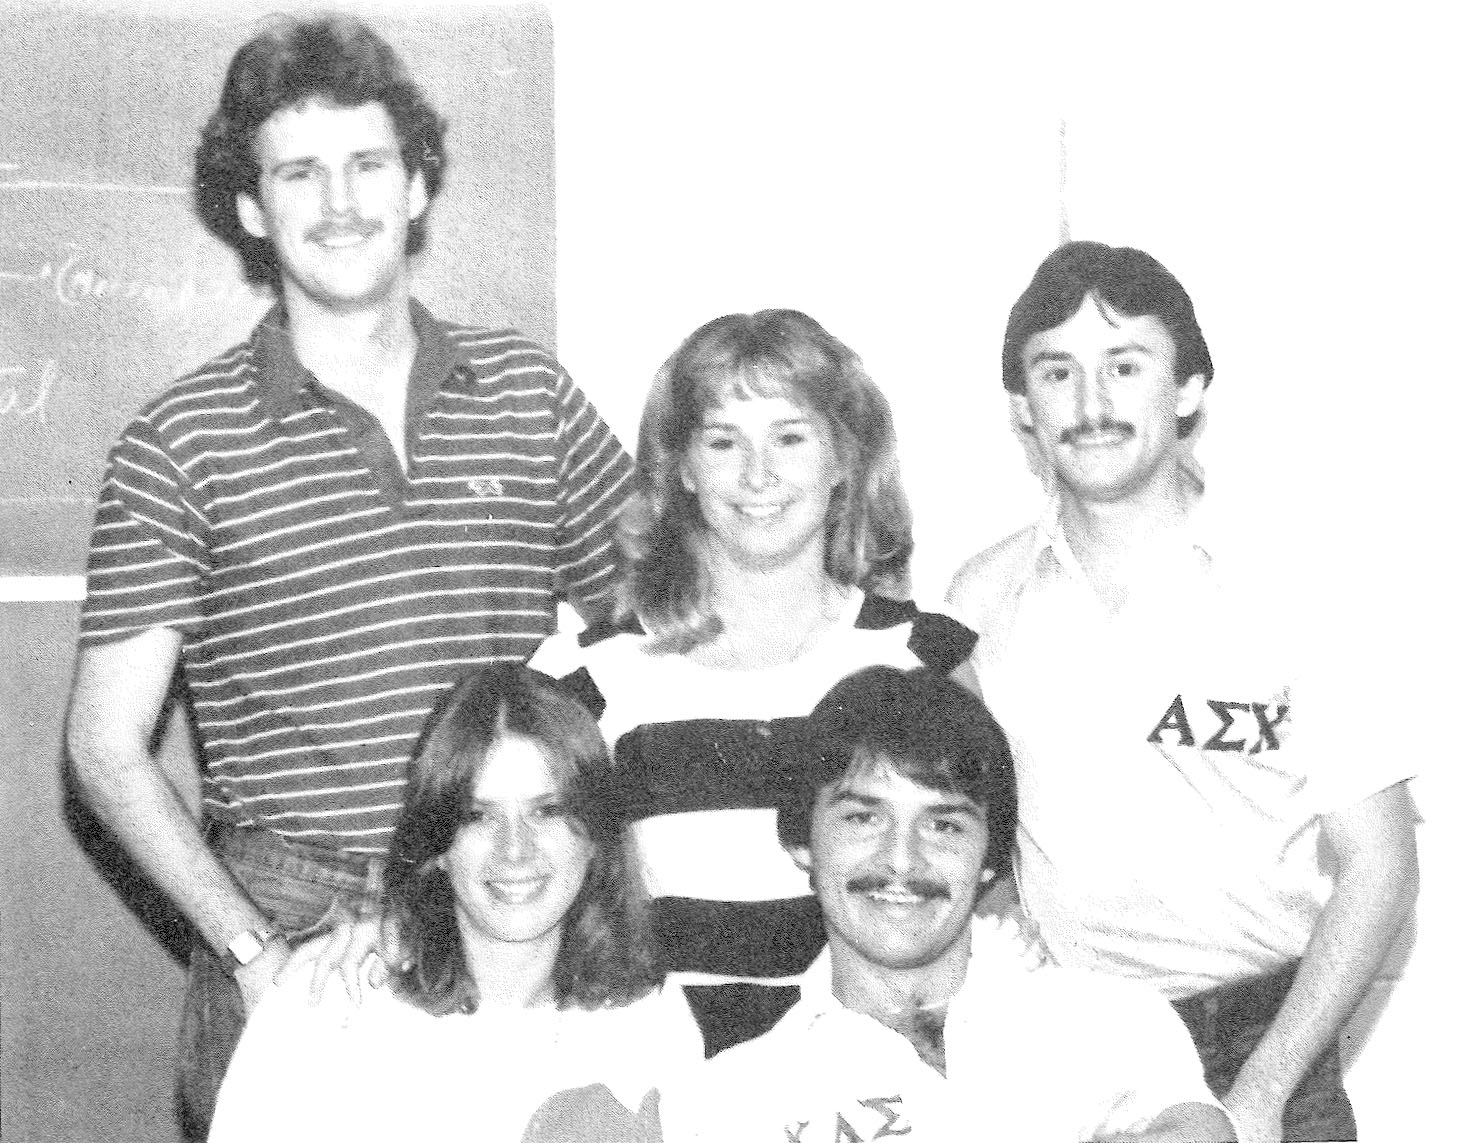 Julie (Tobey) Jenkins ’84, center, served on the executive board of Saint Leo’s Student Government Association.